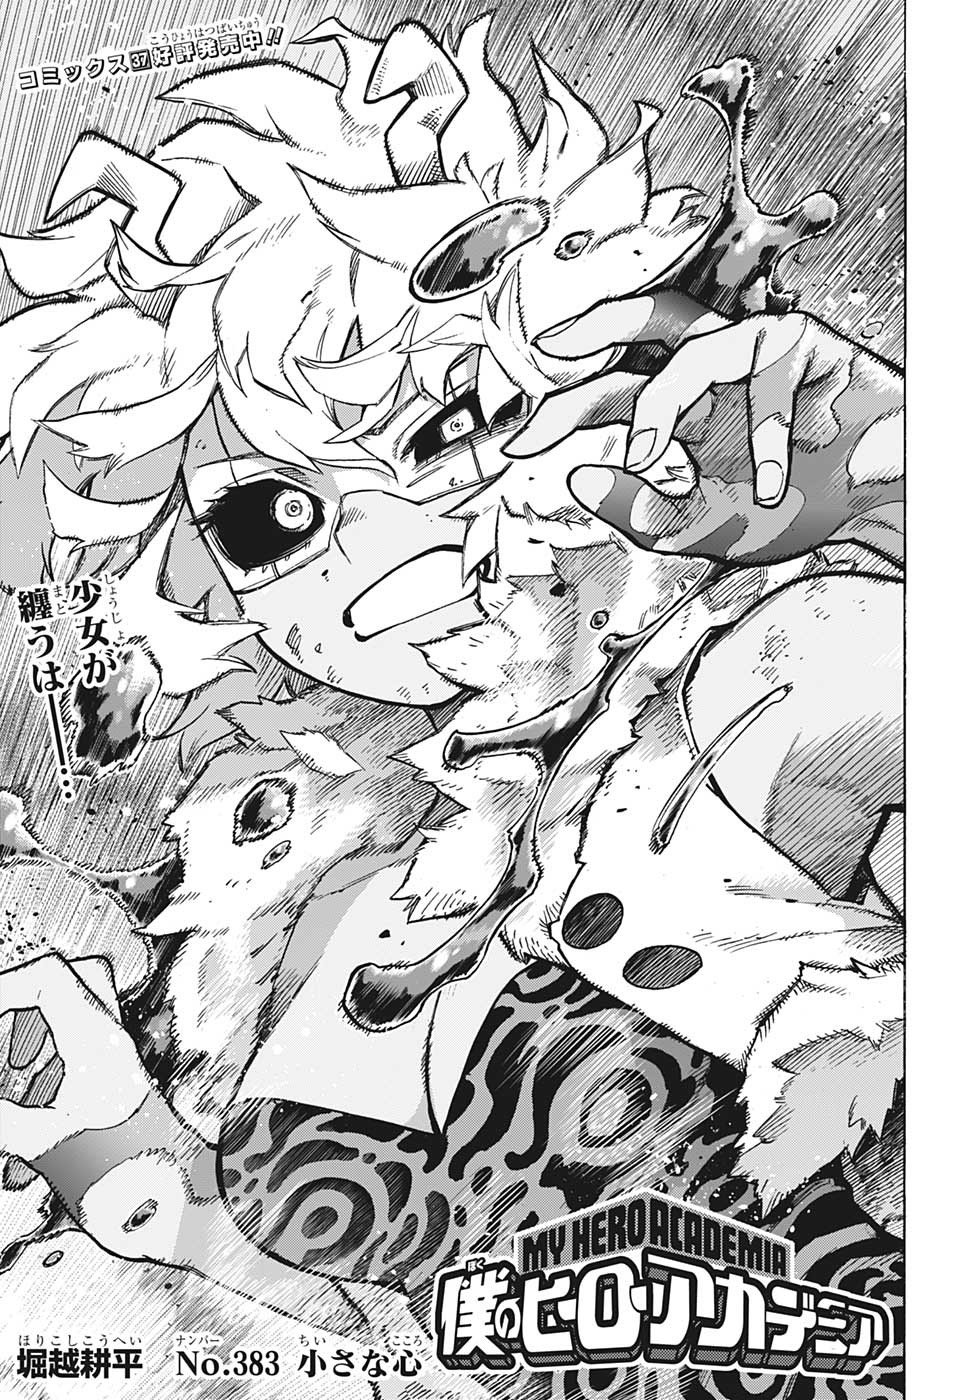 My Hero Academia Chapter 408: Delayed by a week; release date, spoiler  update, and more